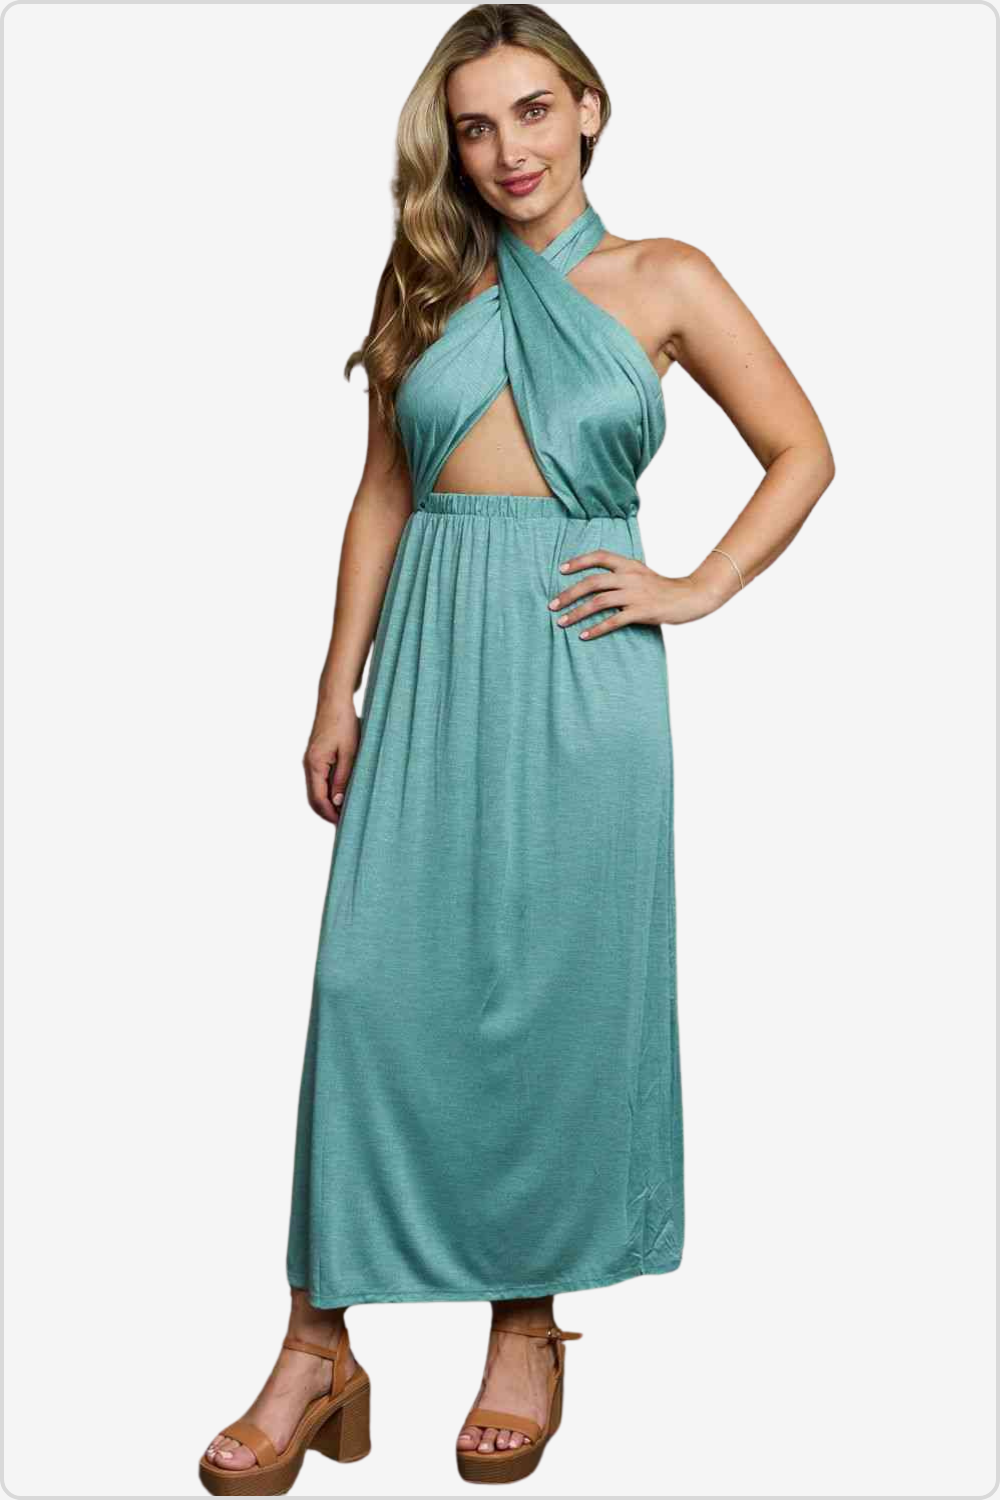 Elegant Halter Neck Dress with Front Cut-Out